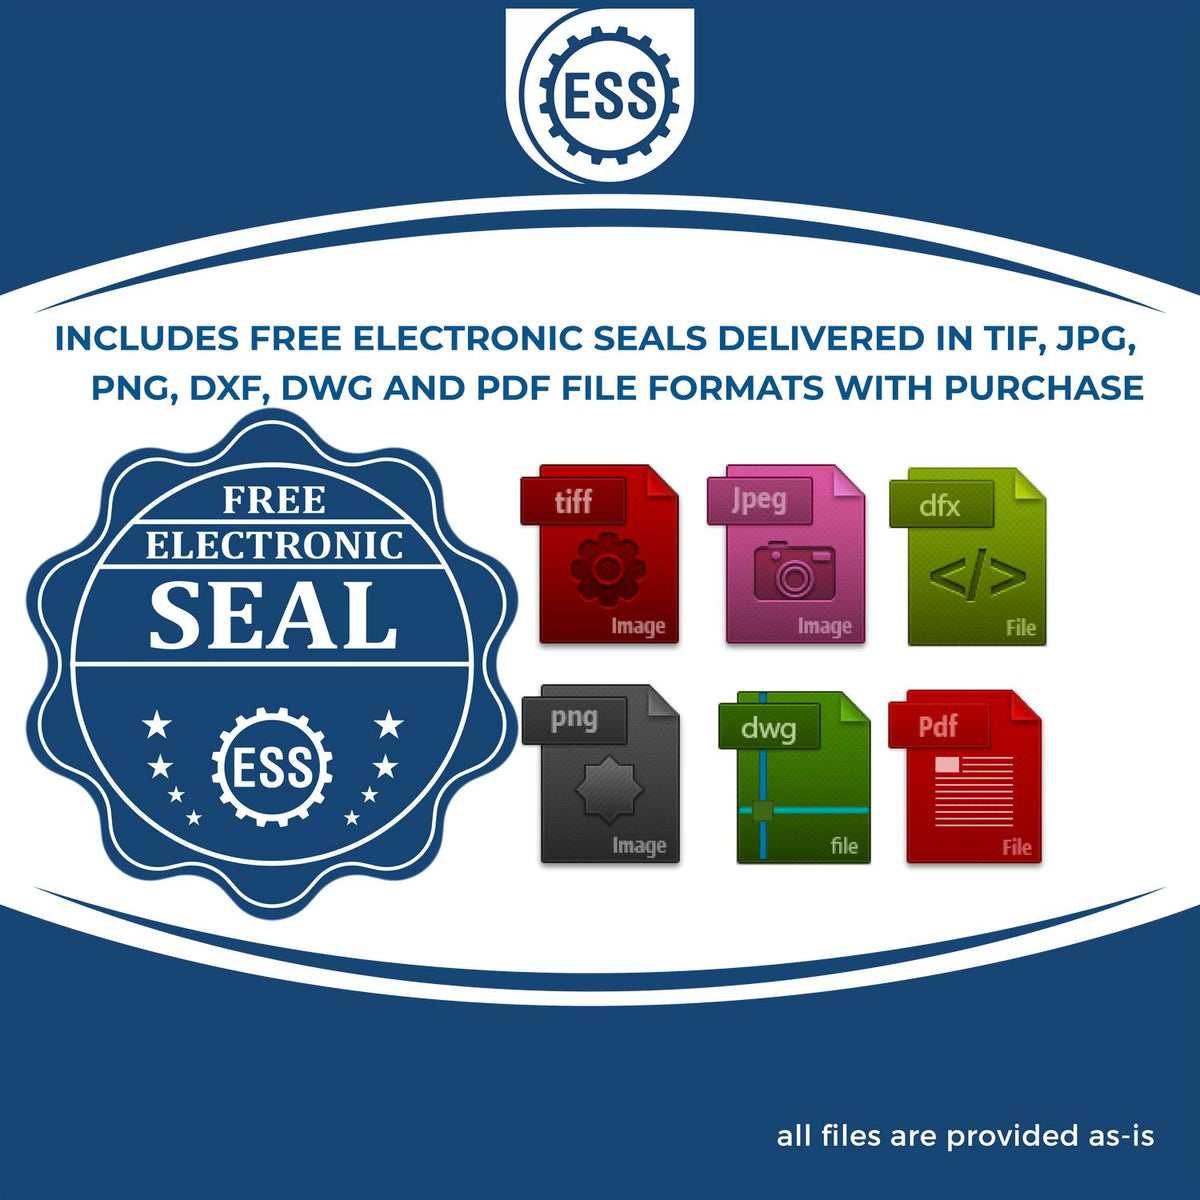 An infographic for the free electronic seal for the State of Rhode Island Long Reach Architectural Embossing Seal illustrating the different file type icons such as DXF, DWG, TIF, JPG and PNG.